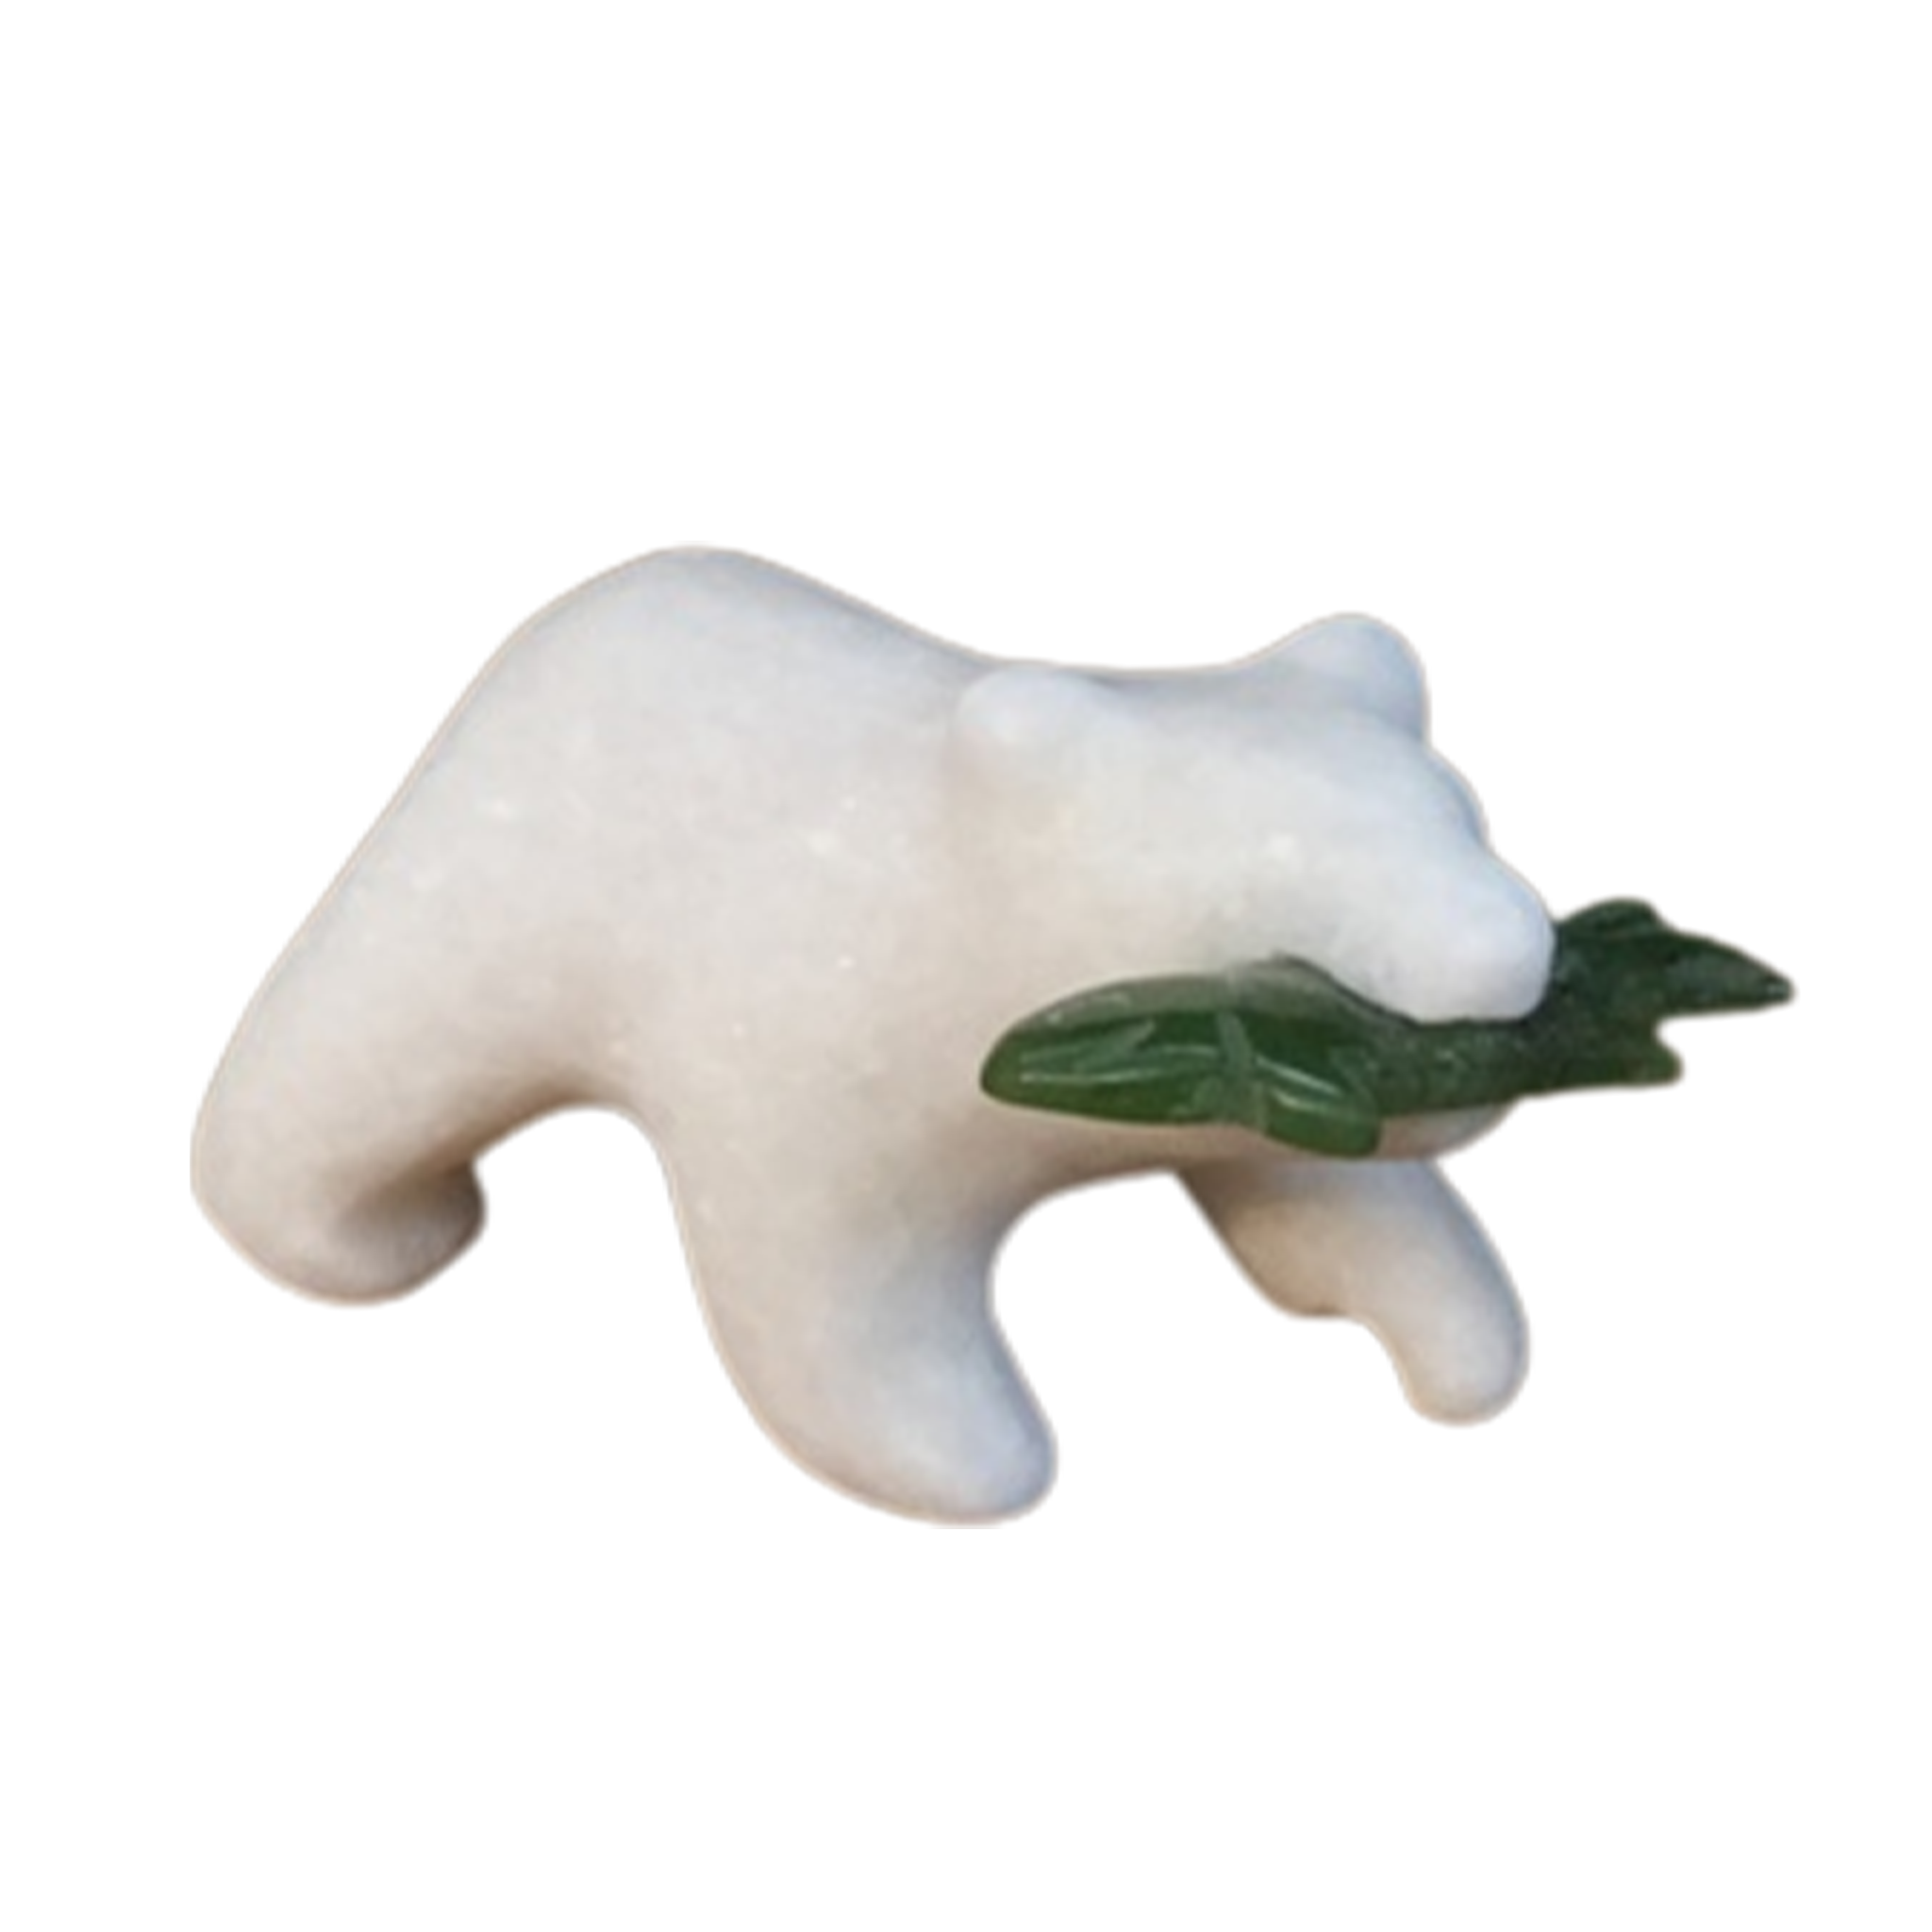 STAR MARBLE Bear with Fish, 3"